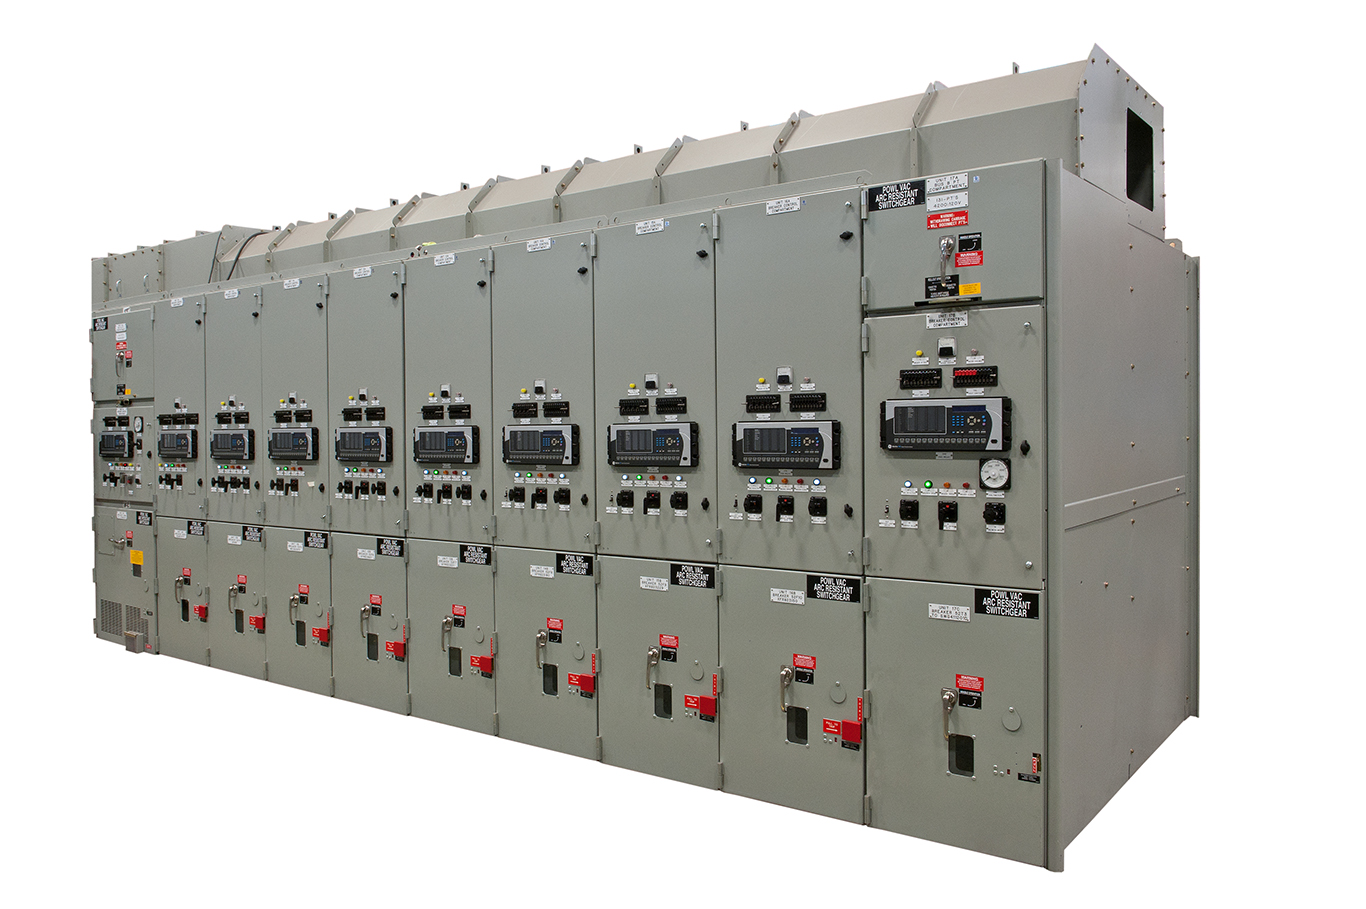 A block of arc rated switchgear. Image by Powell Electrical Systems Inc.